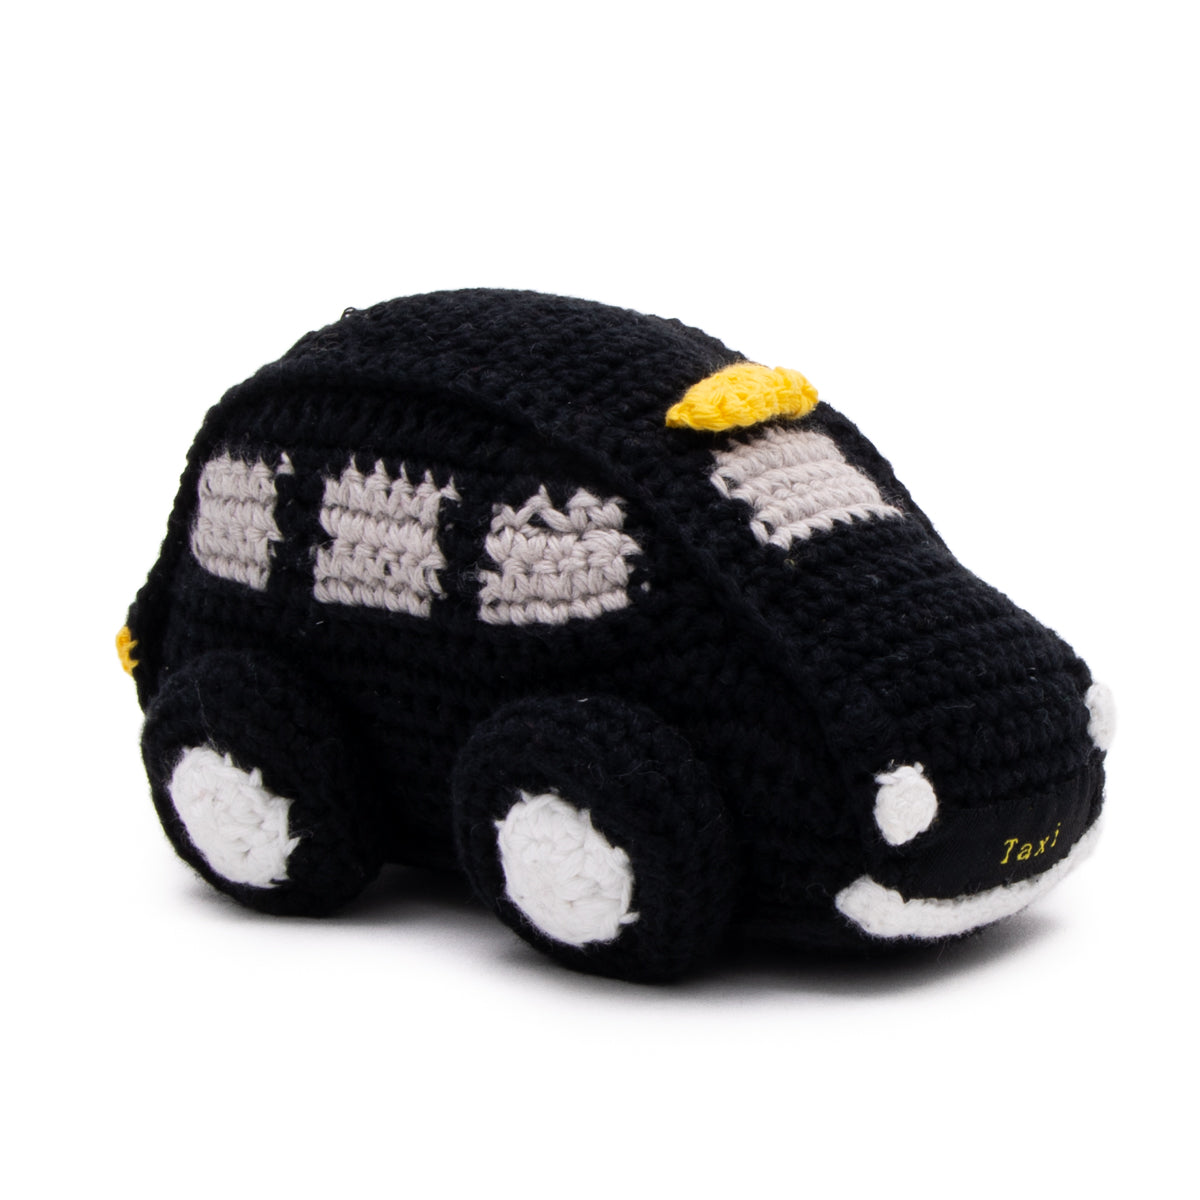 Black Cab Crochet Baby Toy With Rattle 1